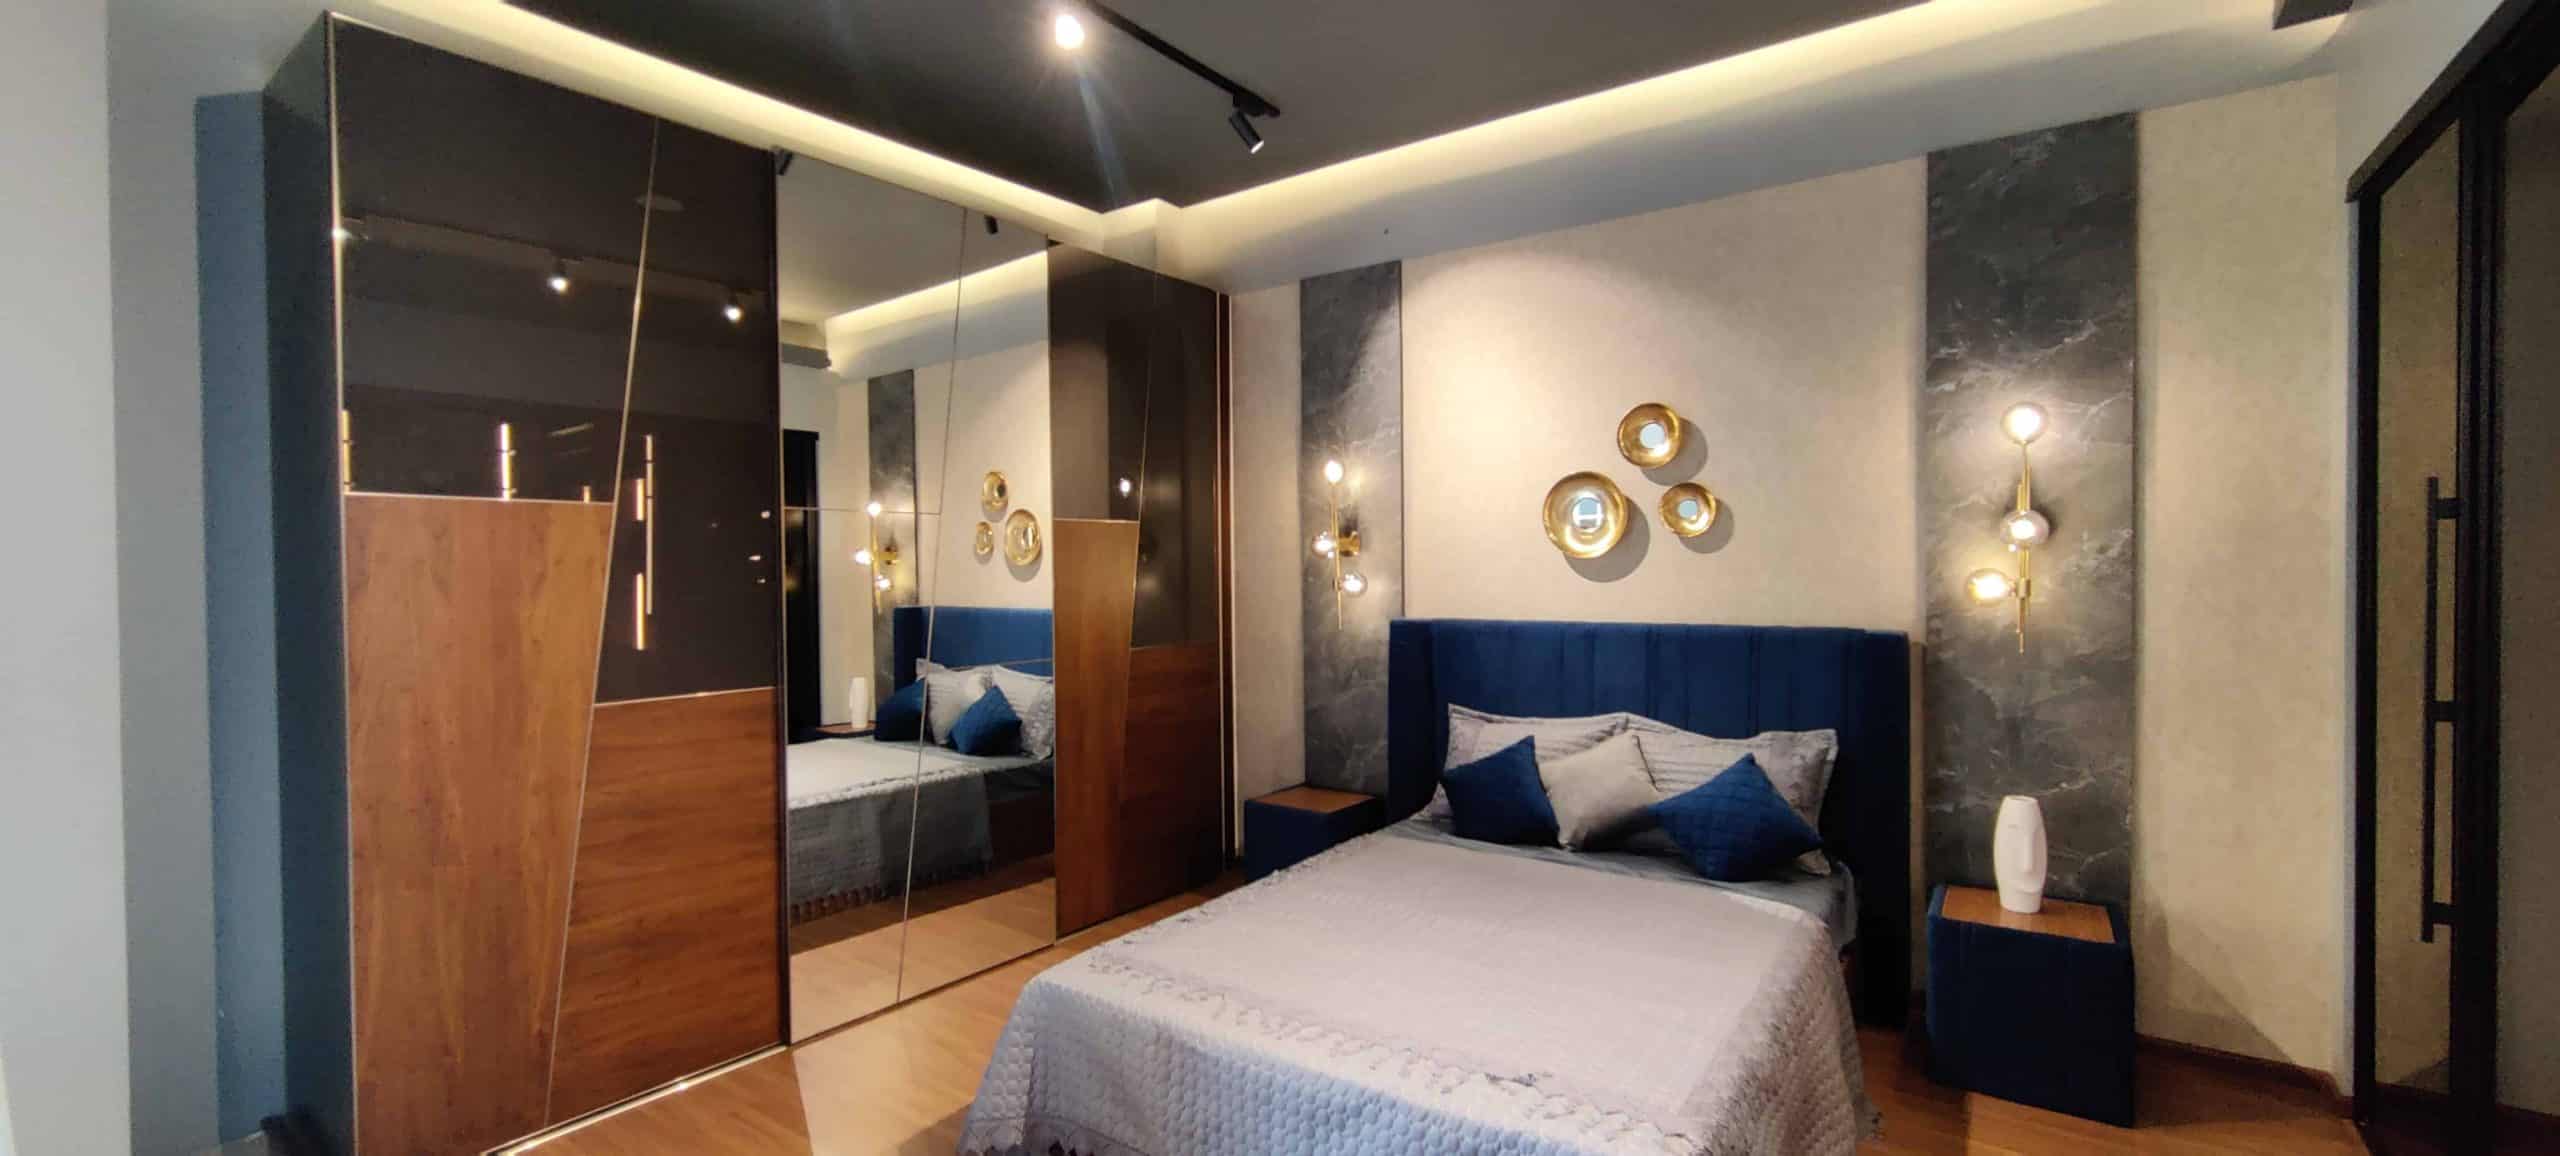 Aristo wardrobe designs for a luxurious room